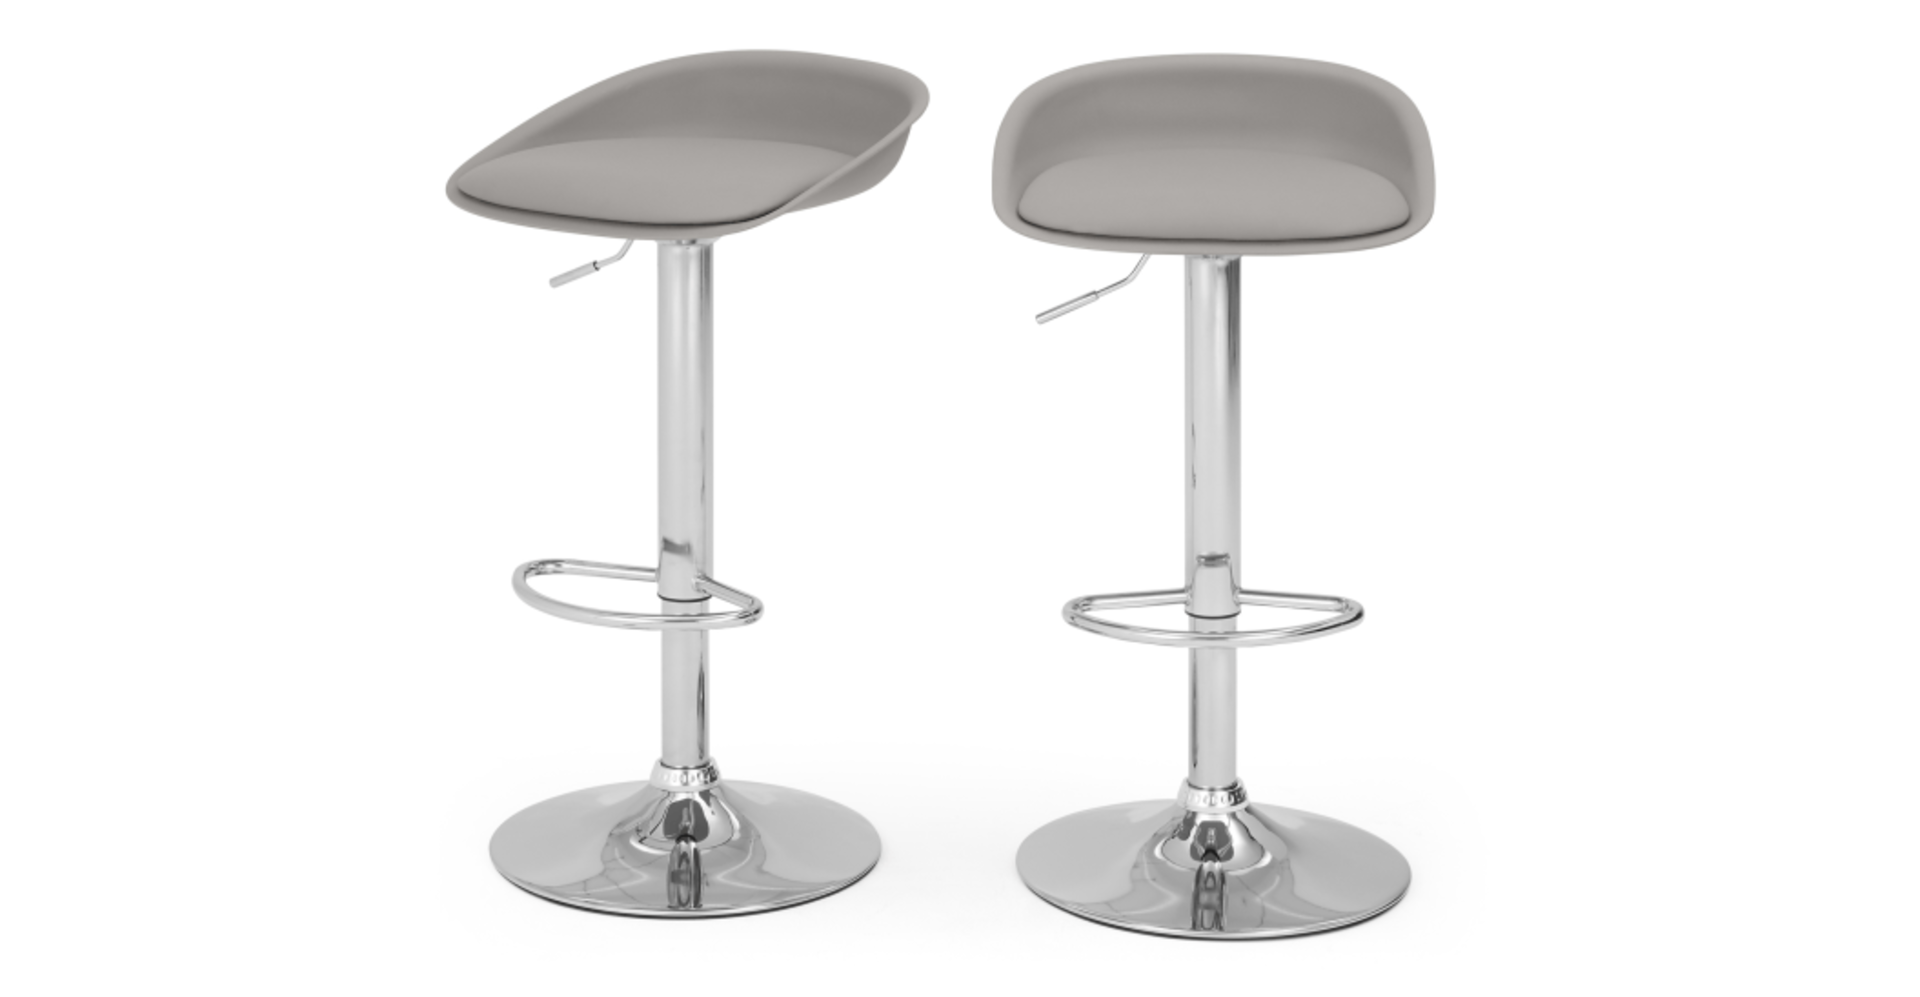 | 1x | MADE.COM box of 2 Kudo Adjustable Bar stools in grey | boxed and unchecked | RRP £99 |